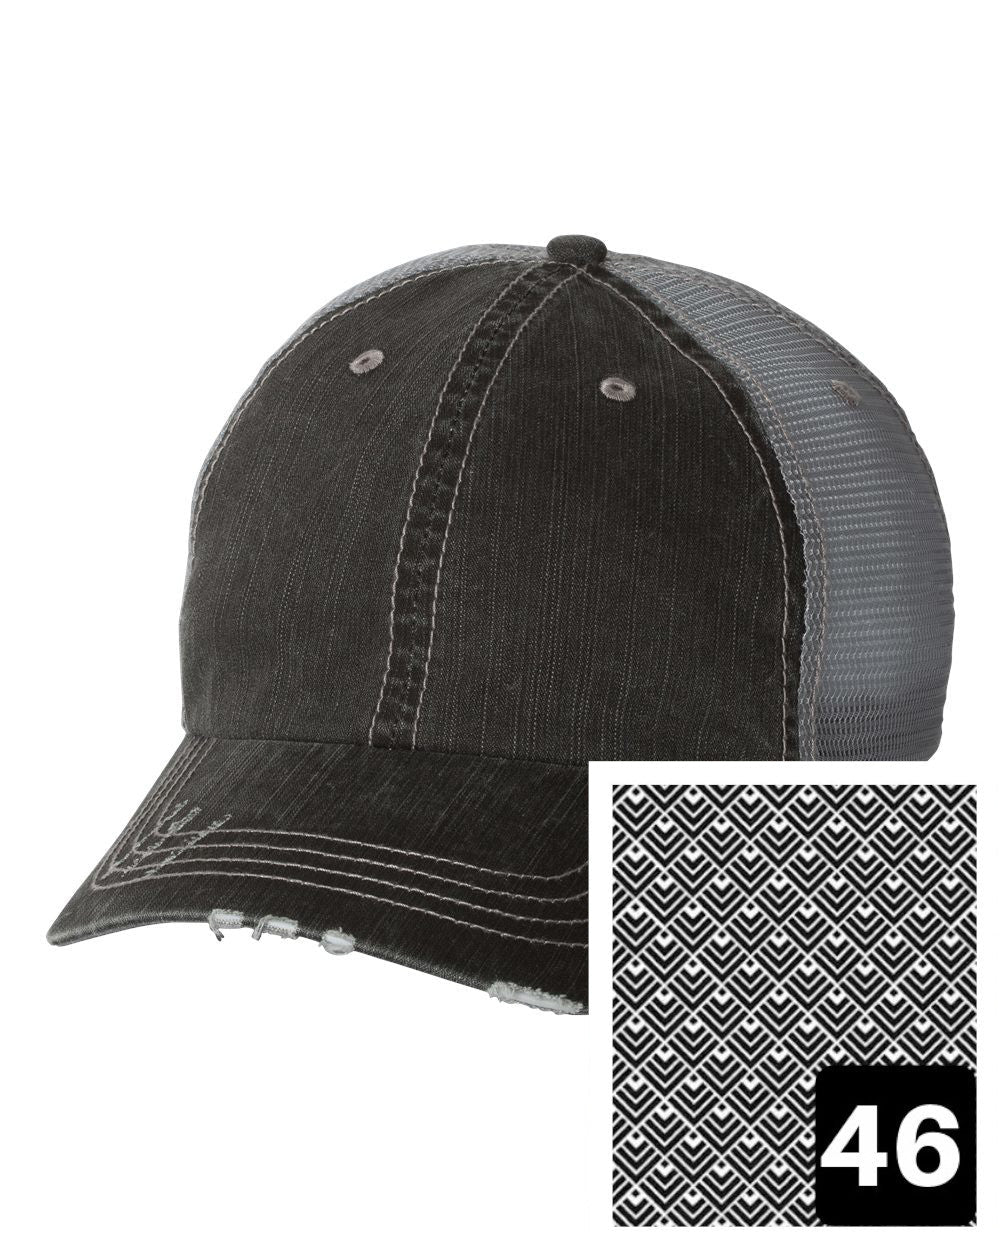 Alabama Hat - Gray Distressed Trucker Cap - Many Fabric Choices